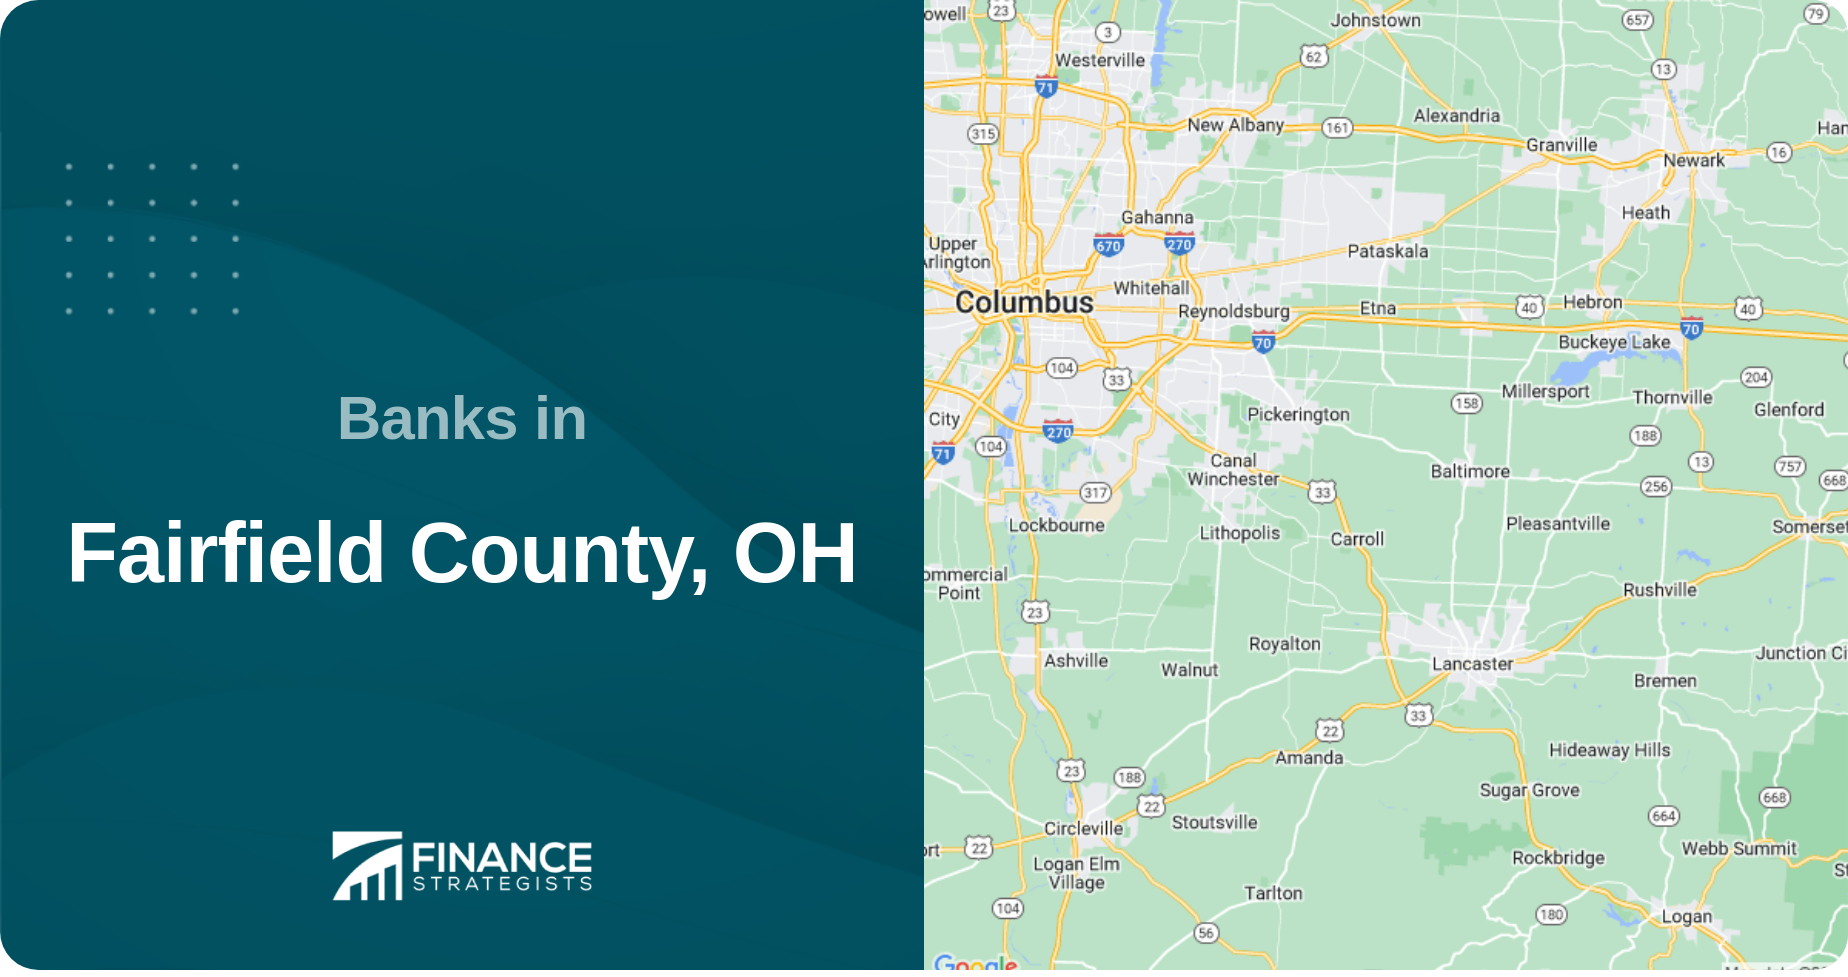 Banks in Fairfield County, OH